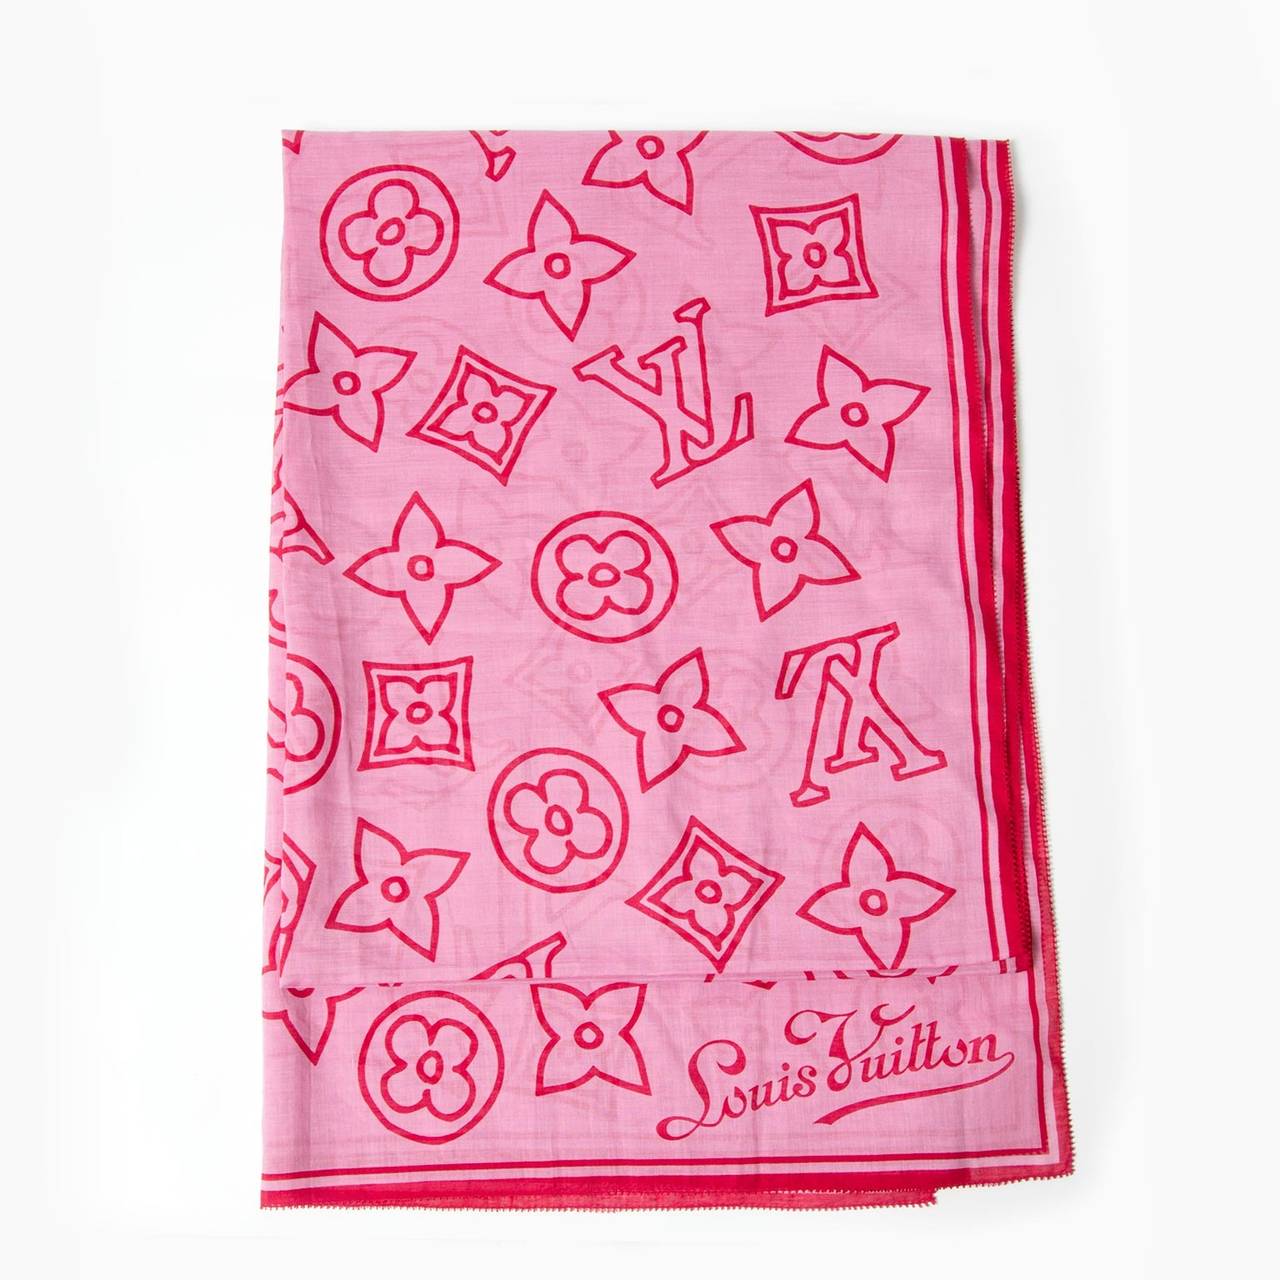 Louis Vuitton Pink and red monogram pare.
Matching Beach Towel available.